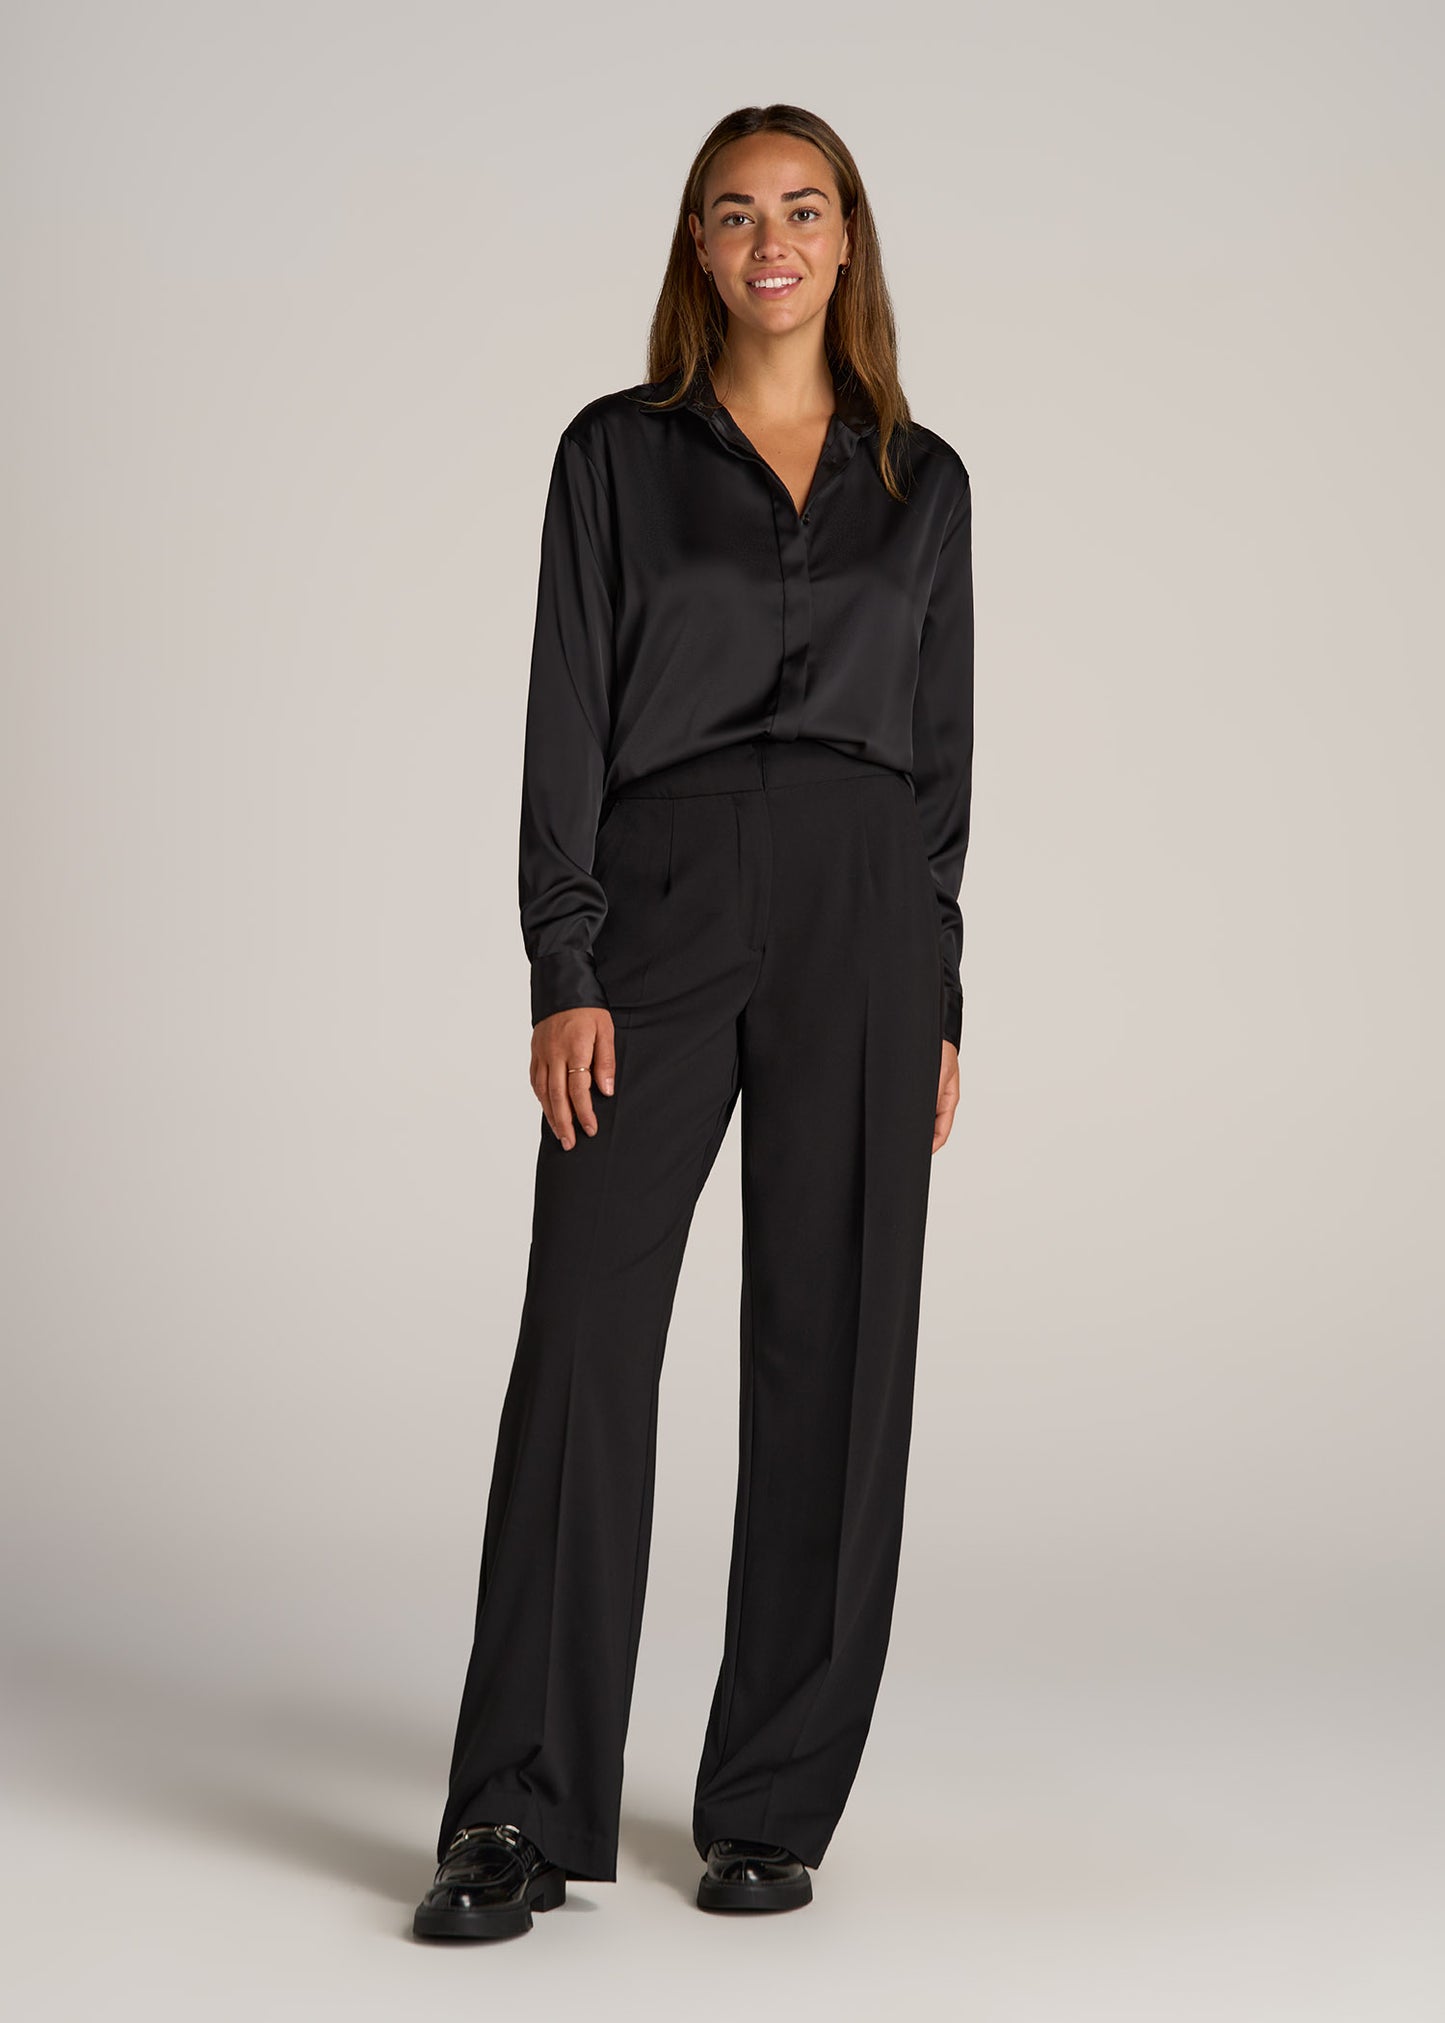 I LOVE TALL - fashion for tall people. Business trousers for tall women